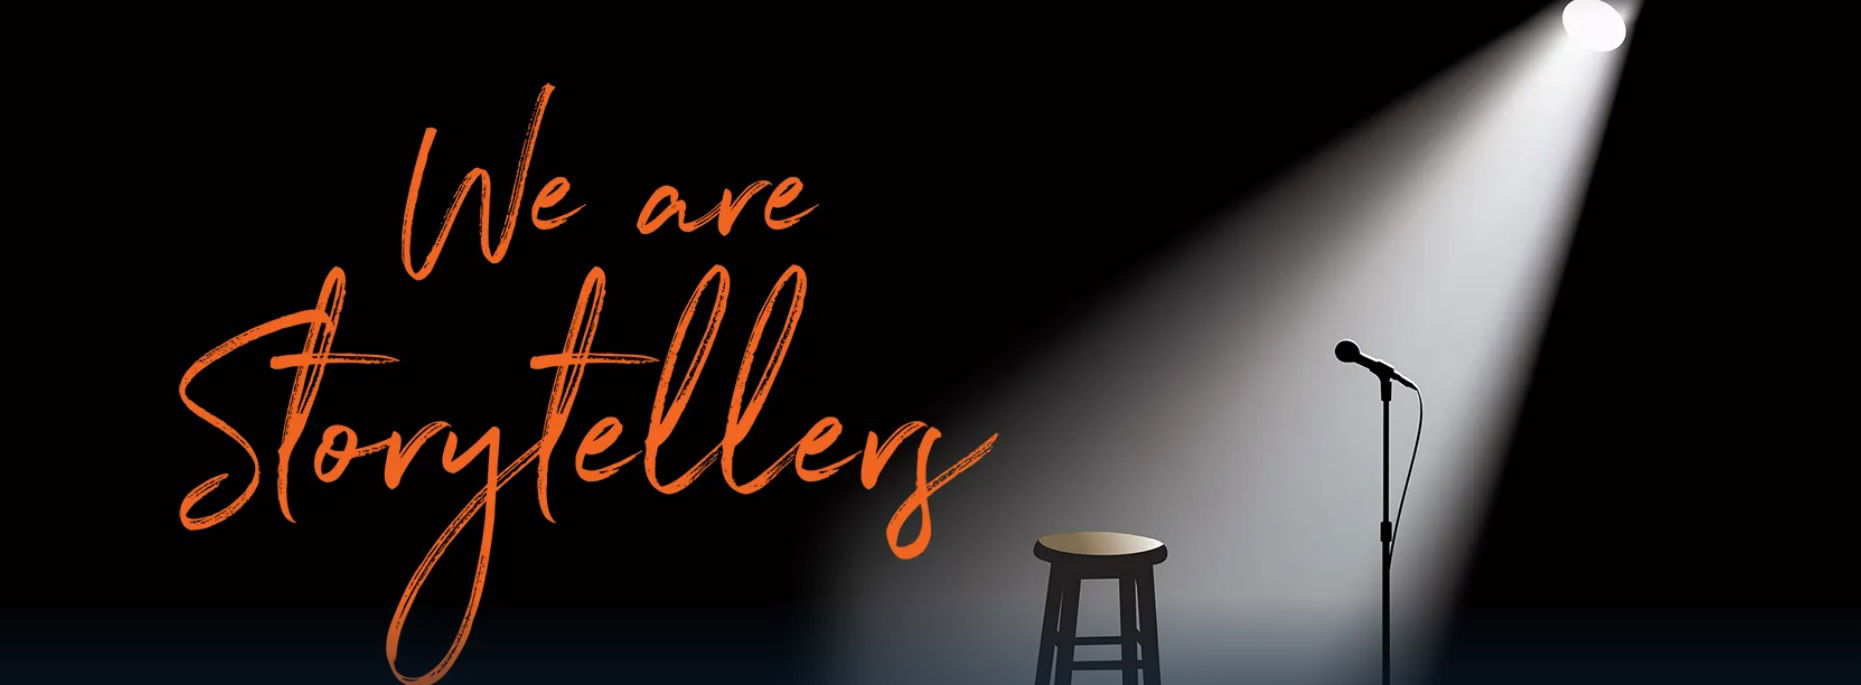 New Repertory Theatre returns with "We Are Storytellers" (Watertown, MA.)